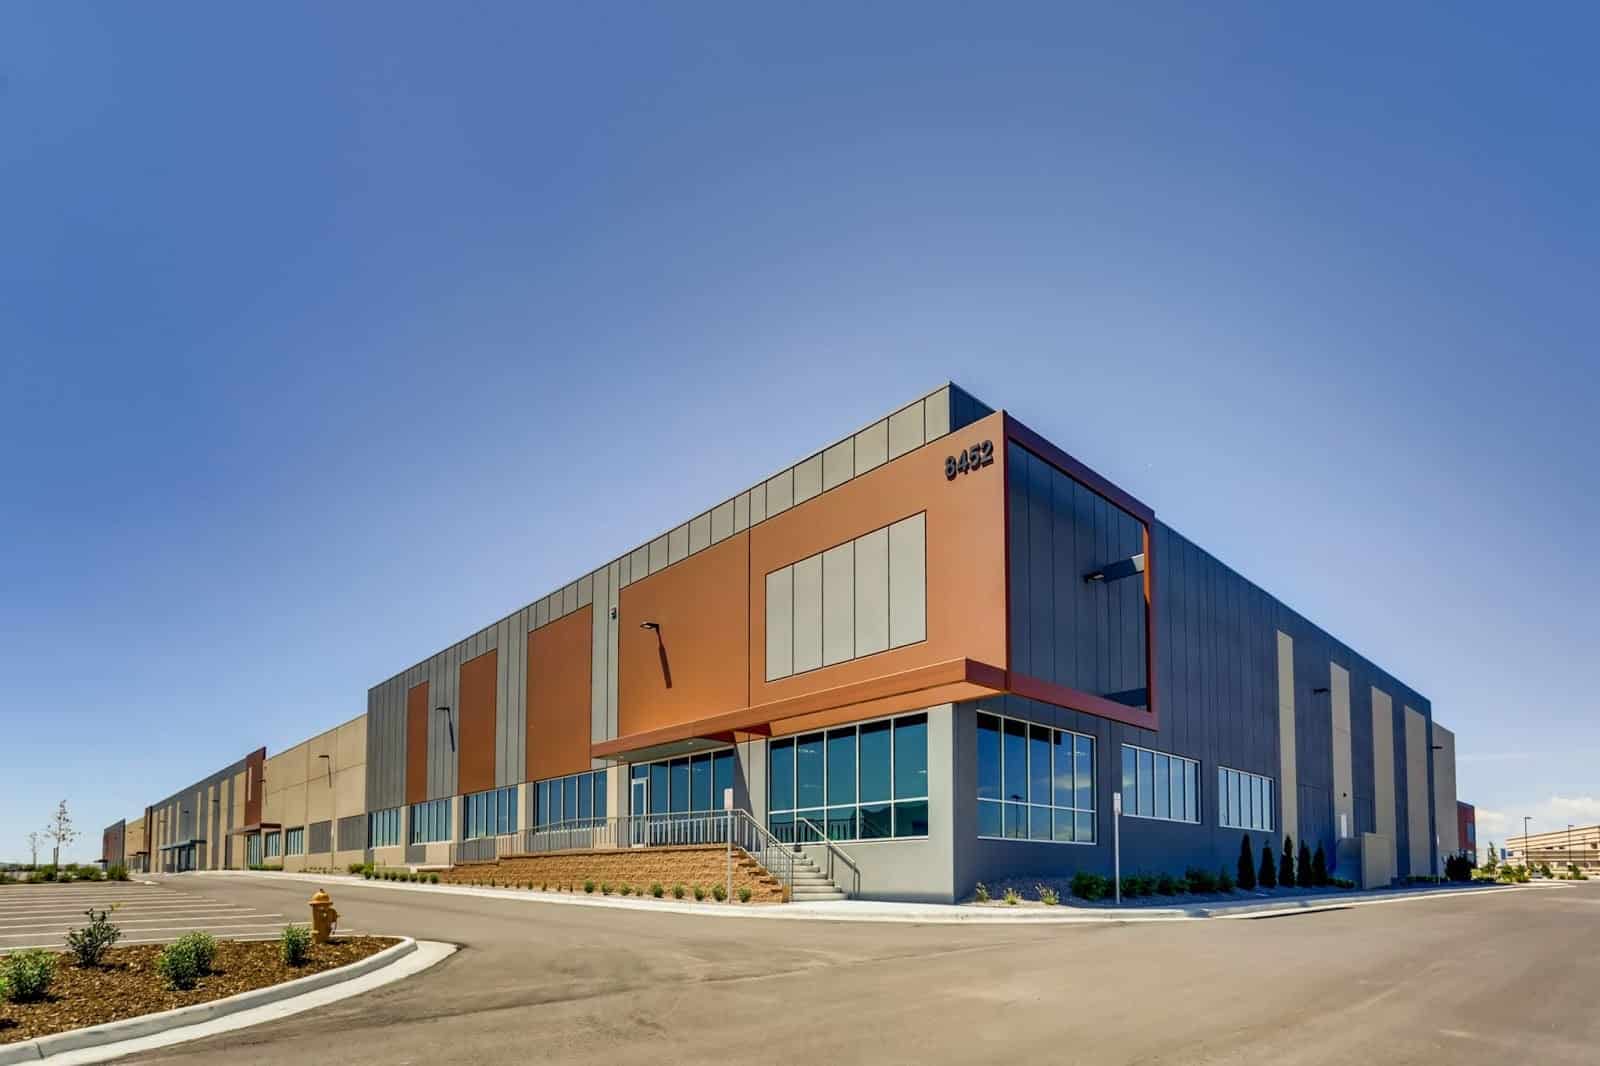 Exterior shot of Highfield — a 100+ acre industrial hub in the Denver South region of Colorado. Credit: Highfield